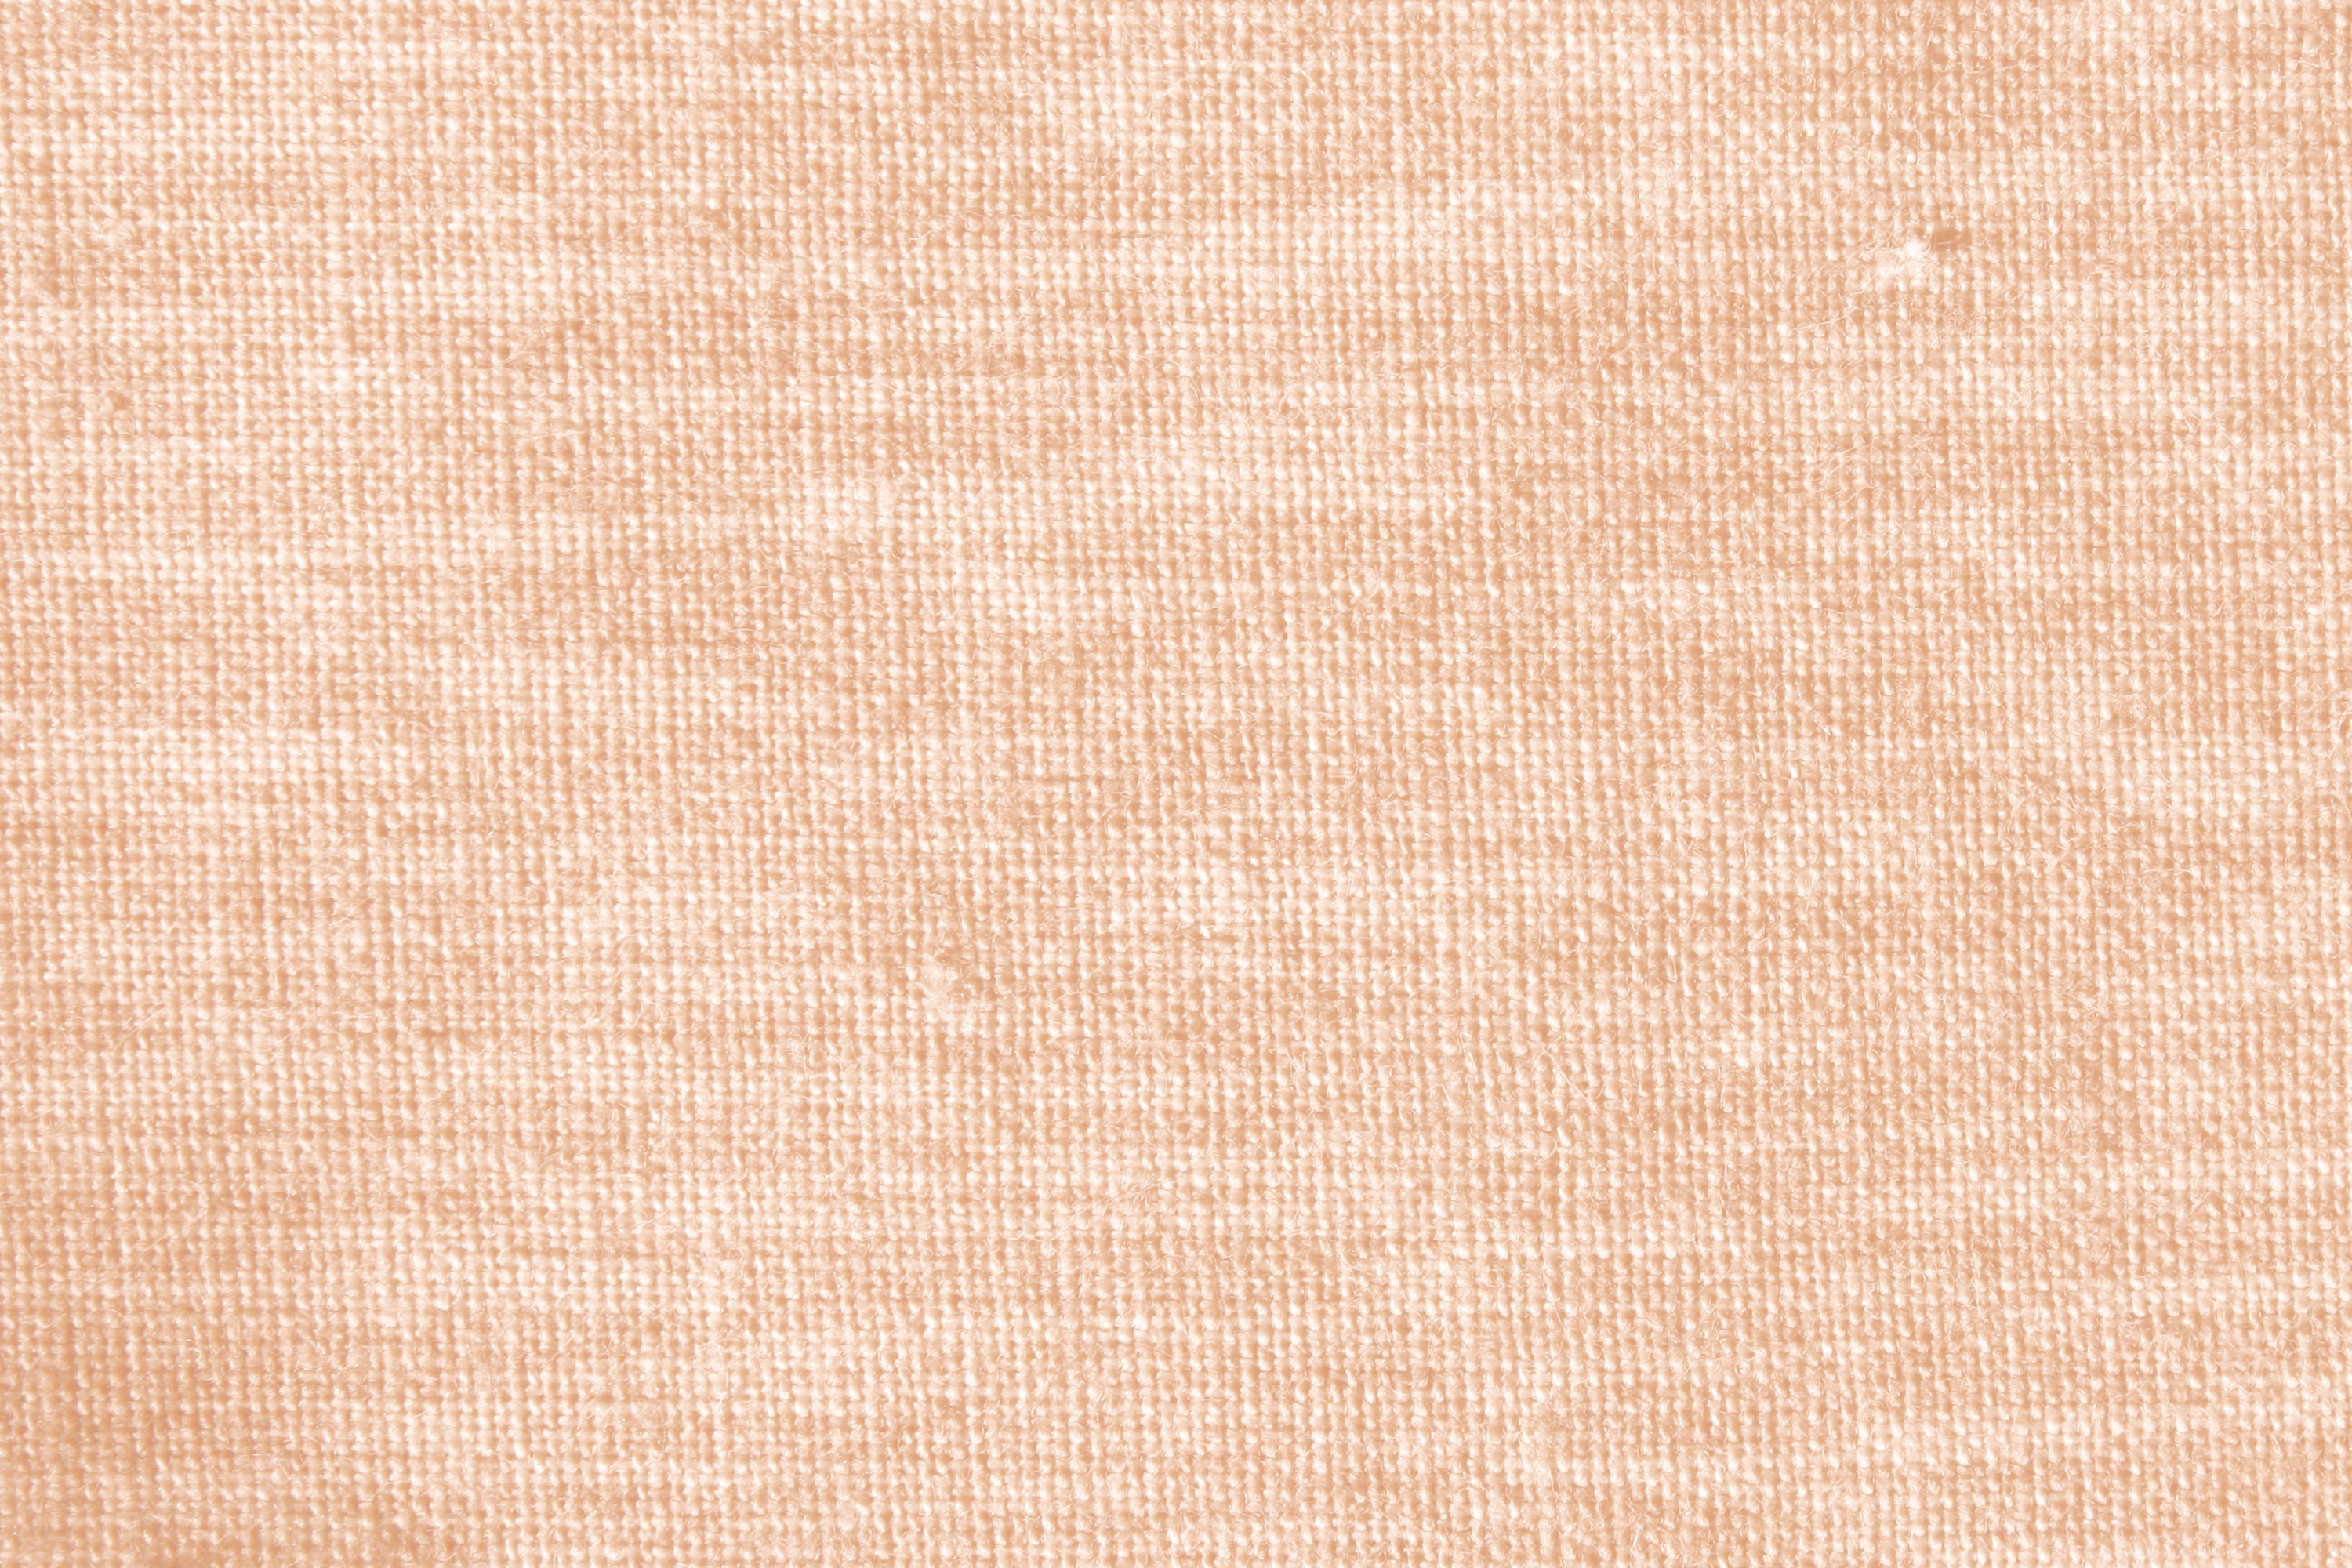 Peach Or Light Orange Woven Fabric Close Up Texture Picture